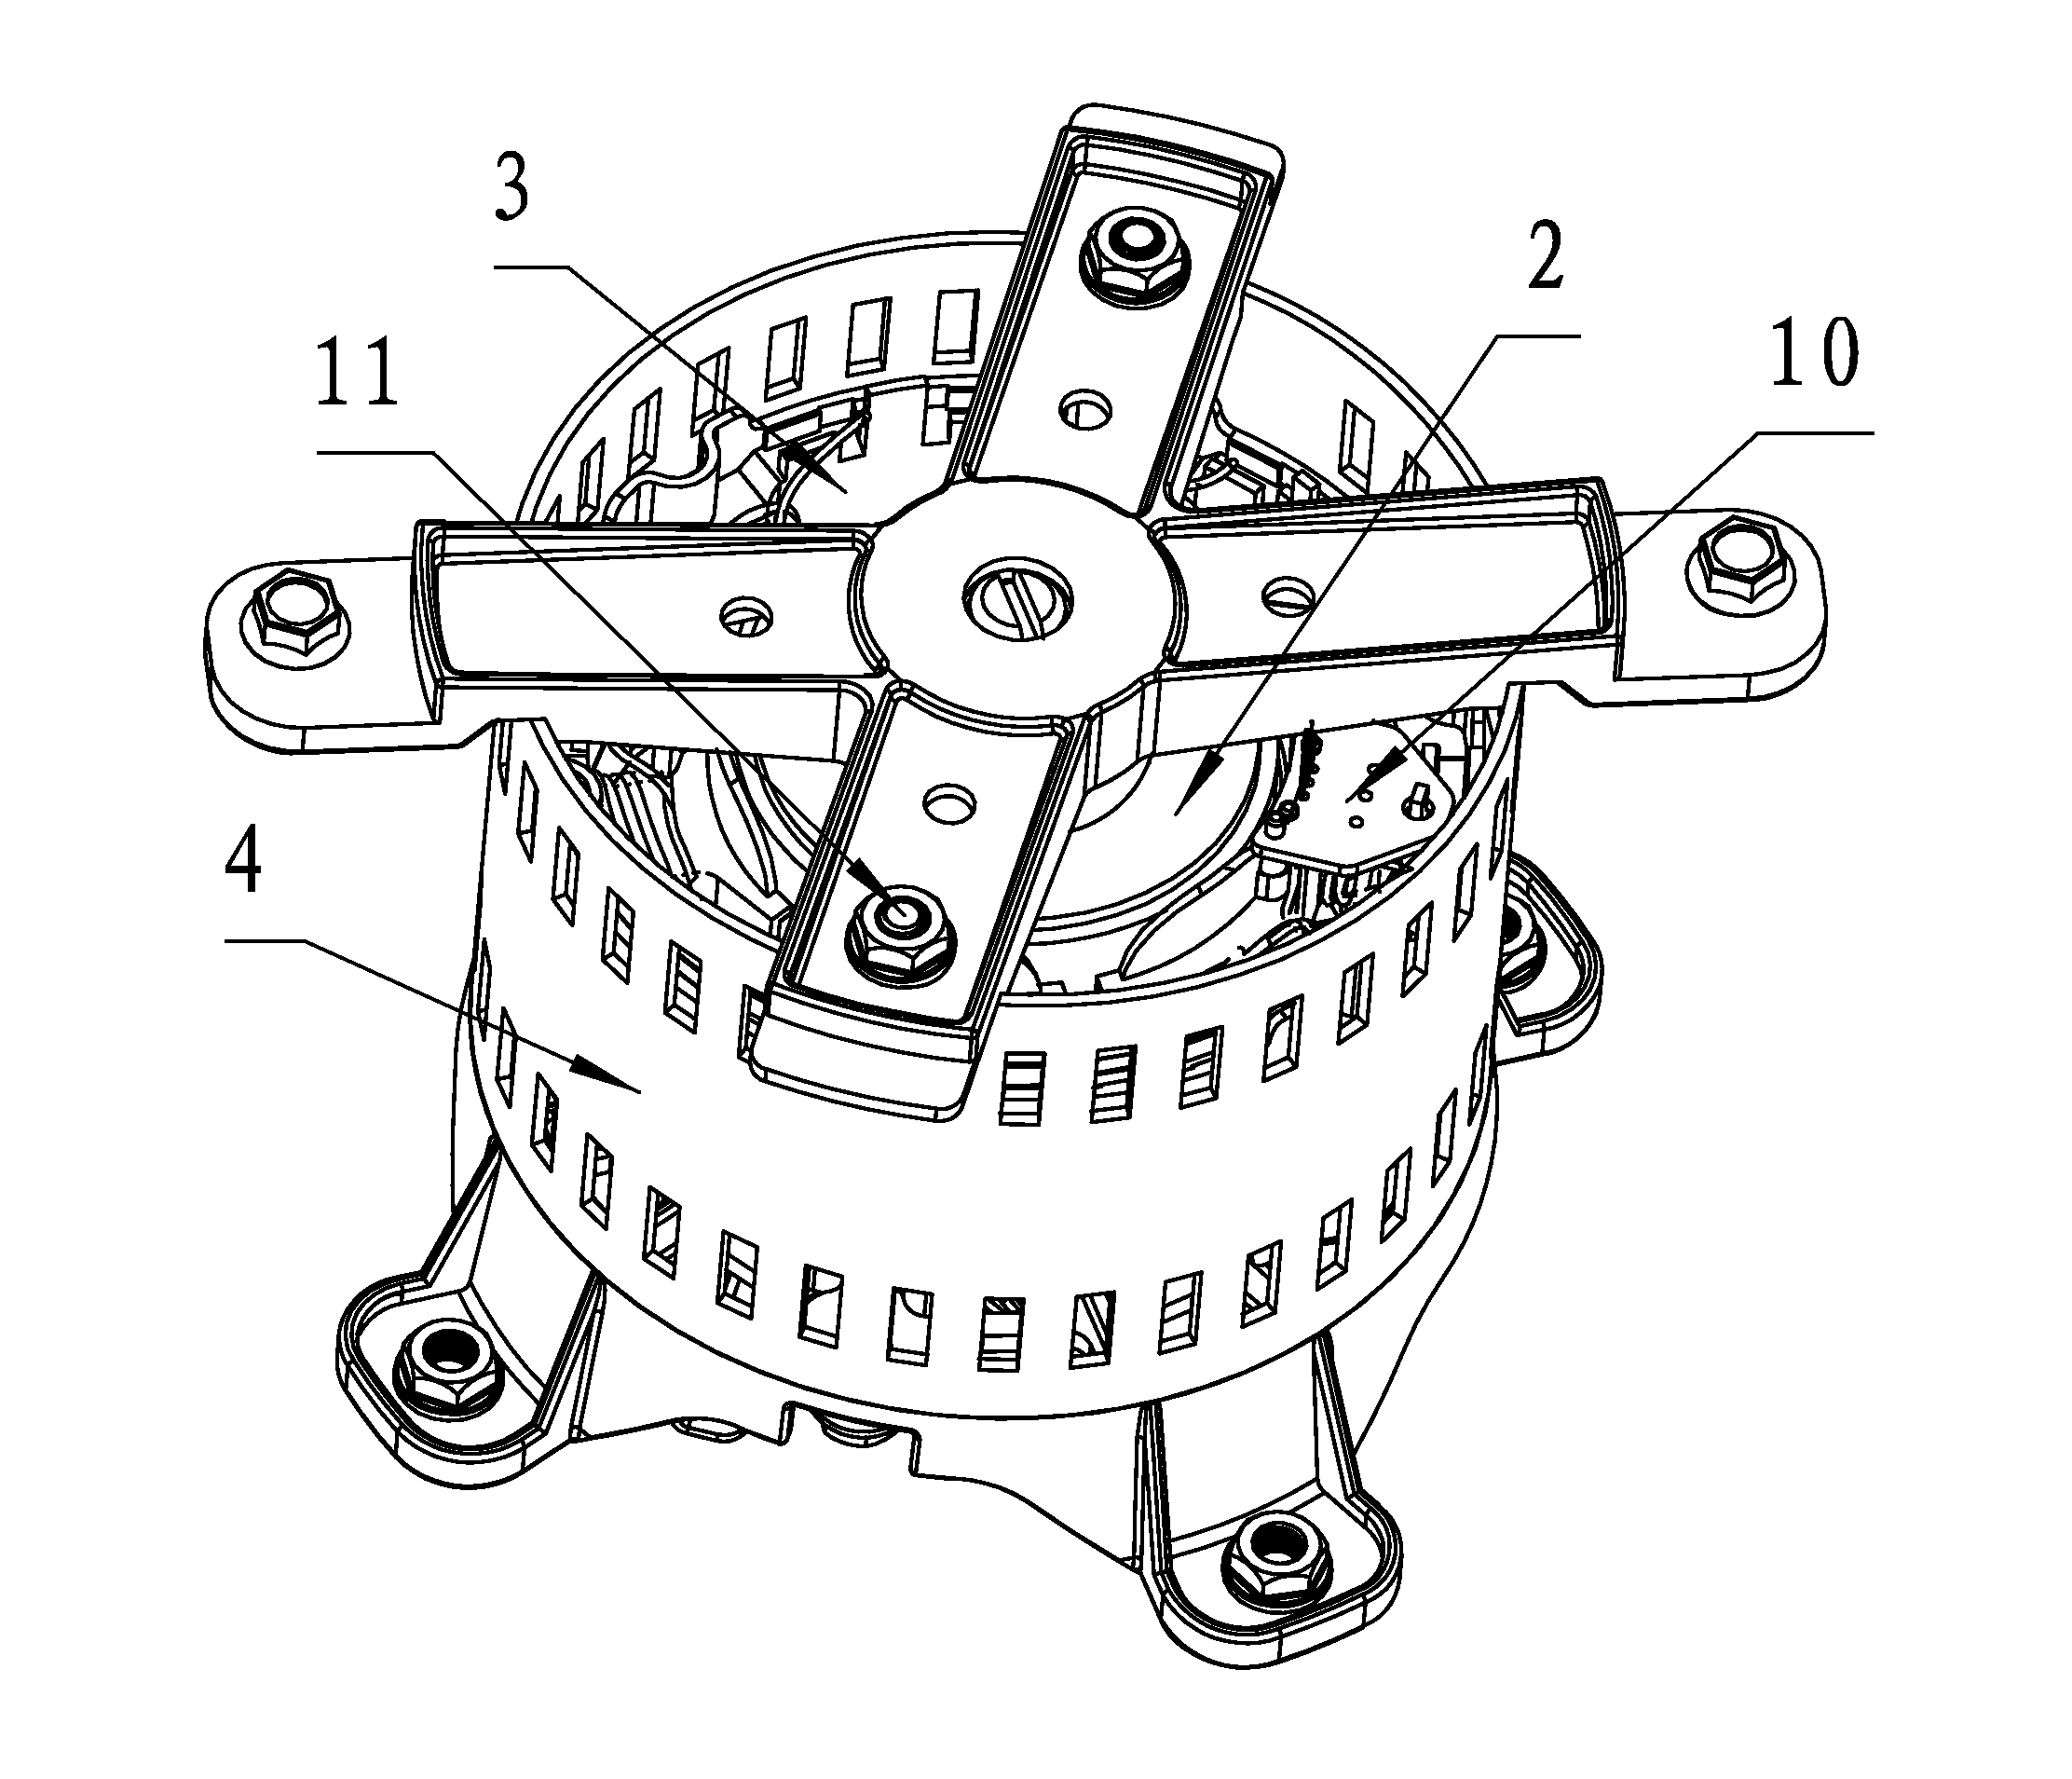 Structure for mounting hall effect sensor of motor